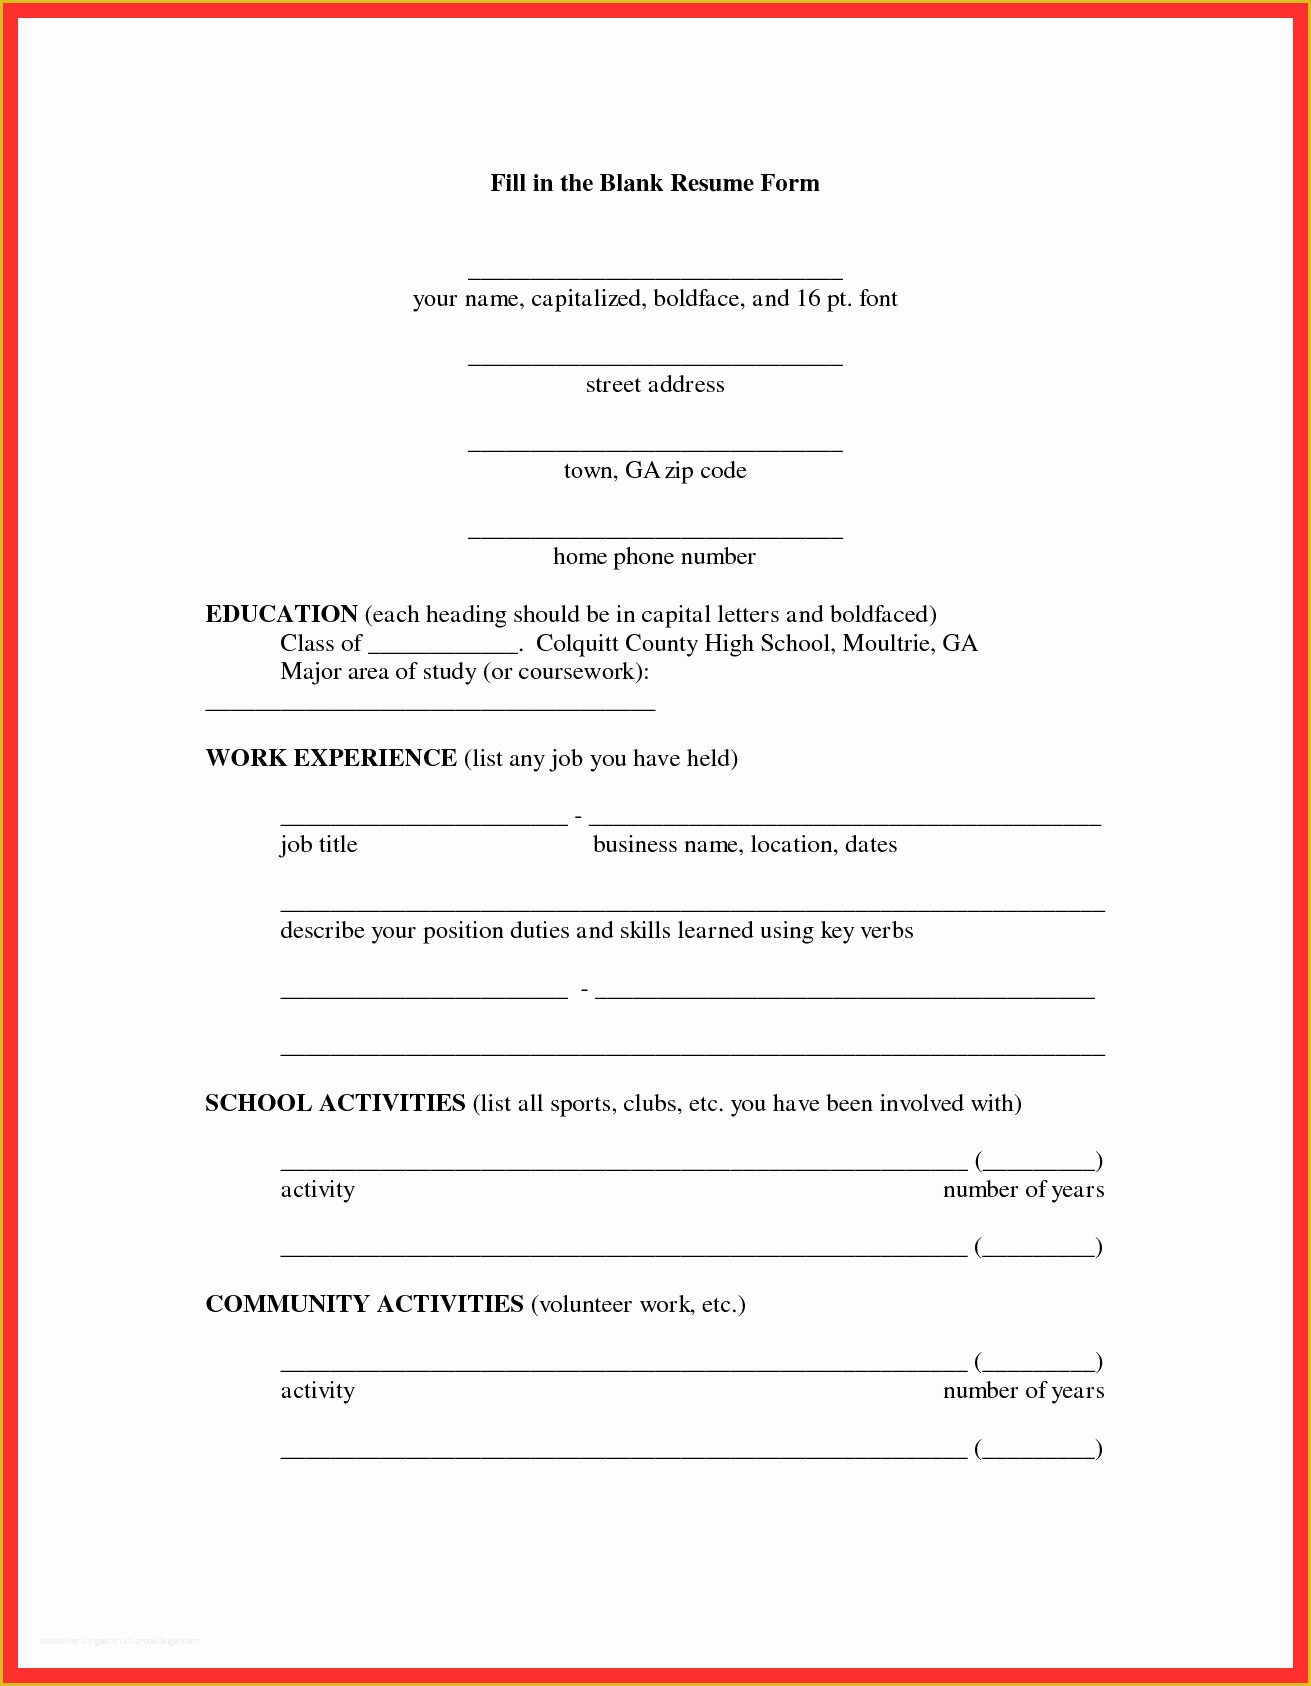 Free Printable Fill In the Blank Resume Templates Of Fill In Resume form